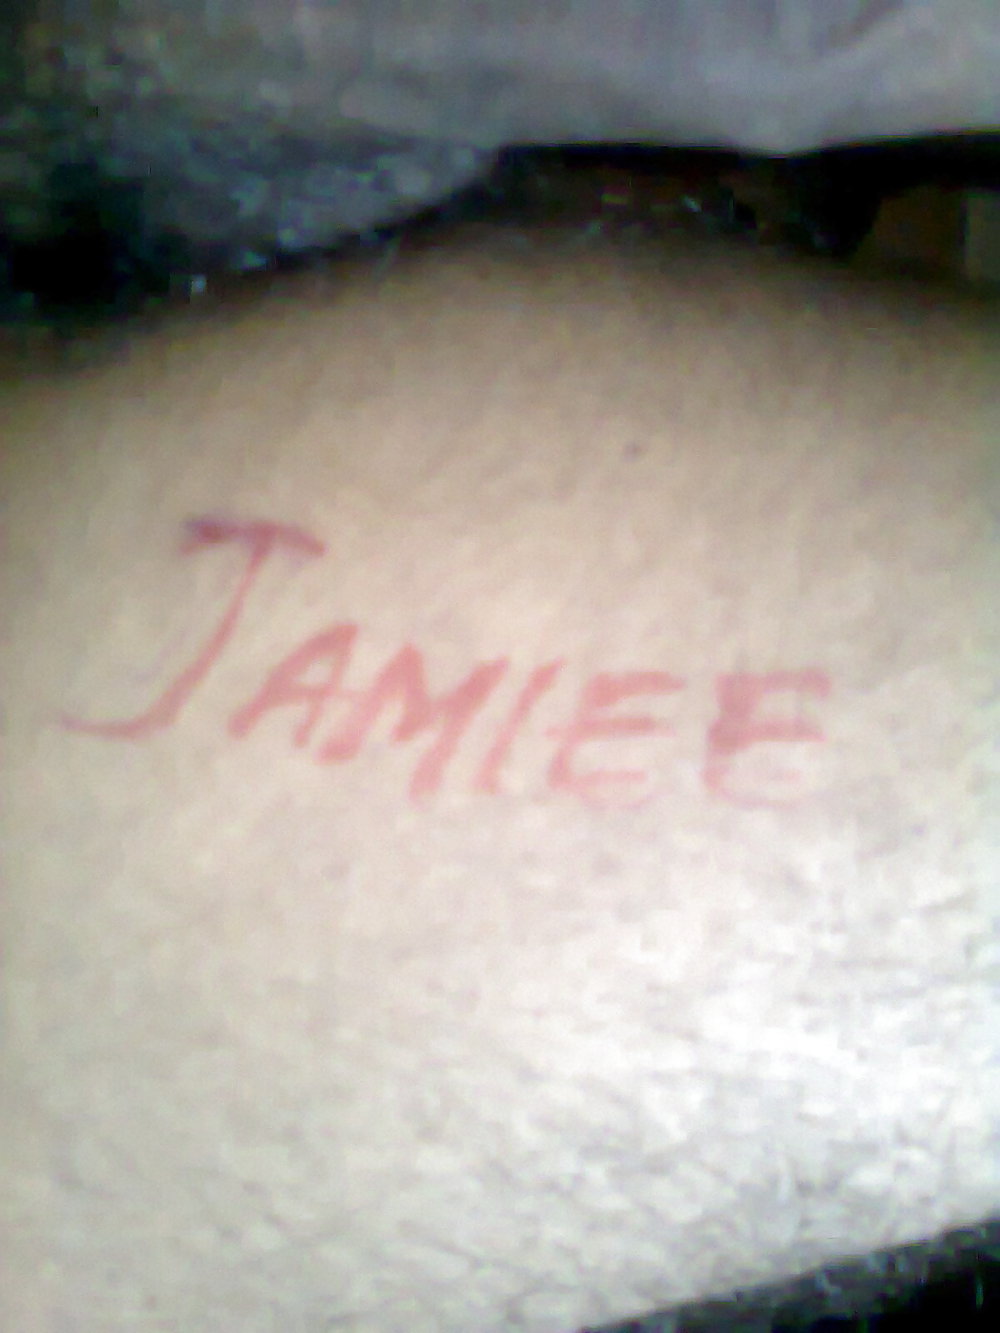 For jamiee #8504488